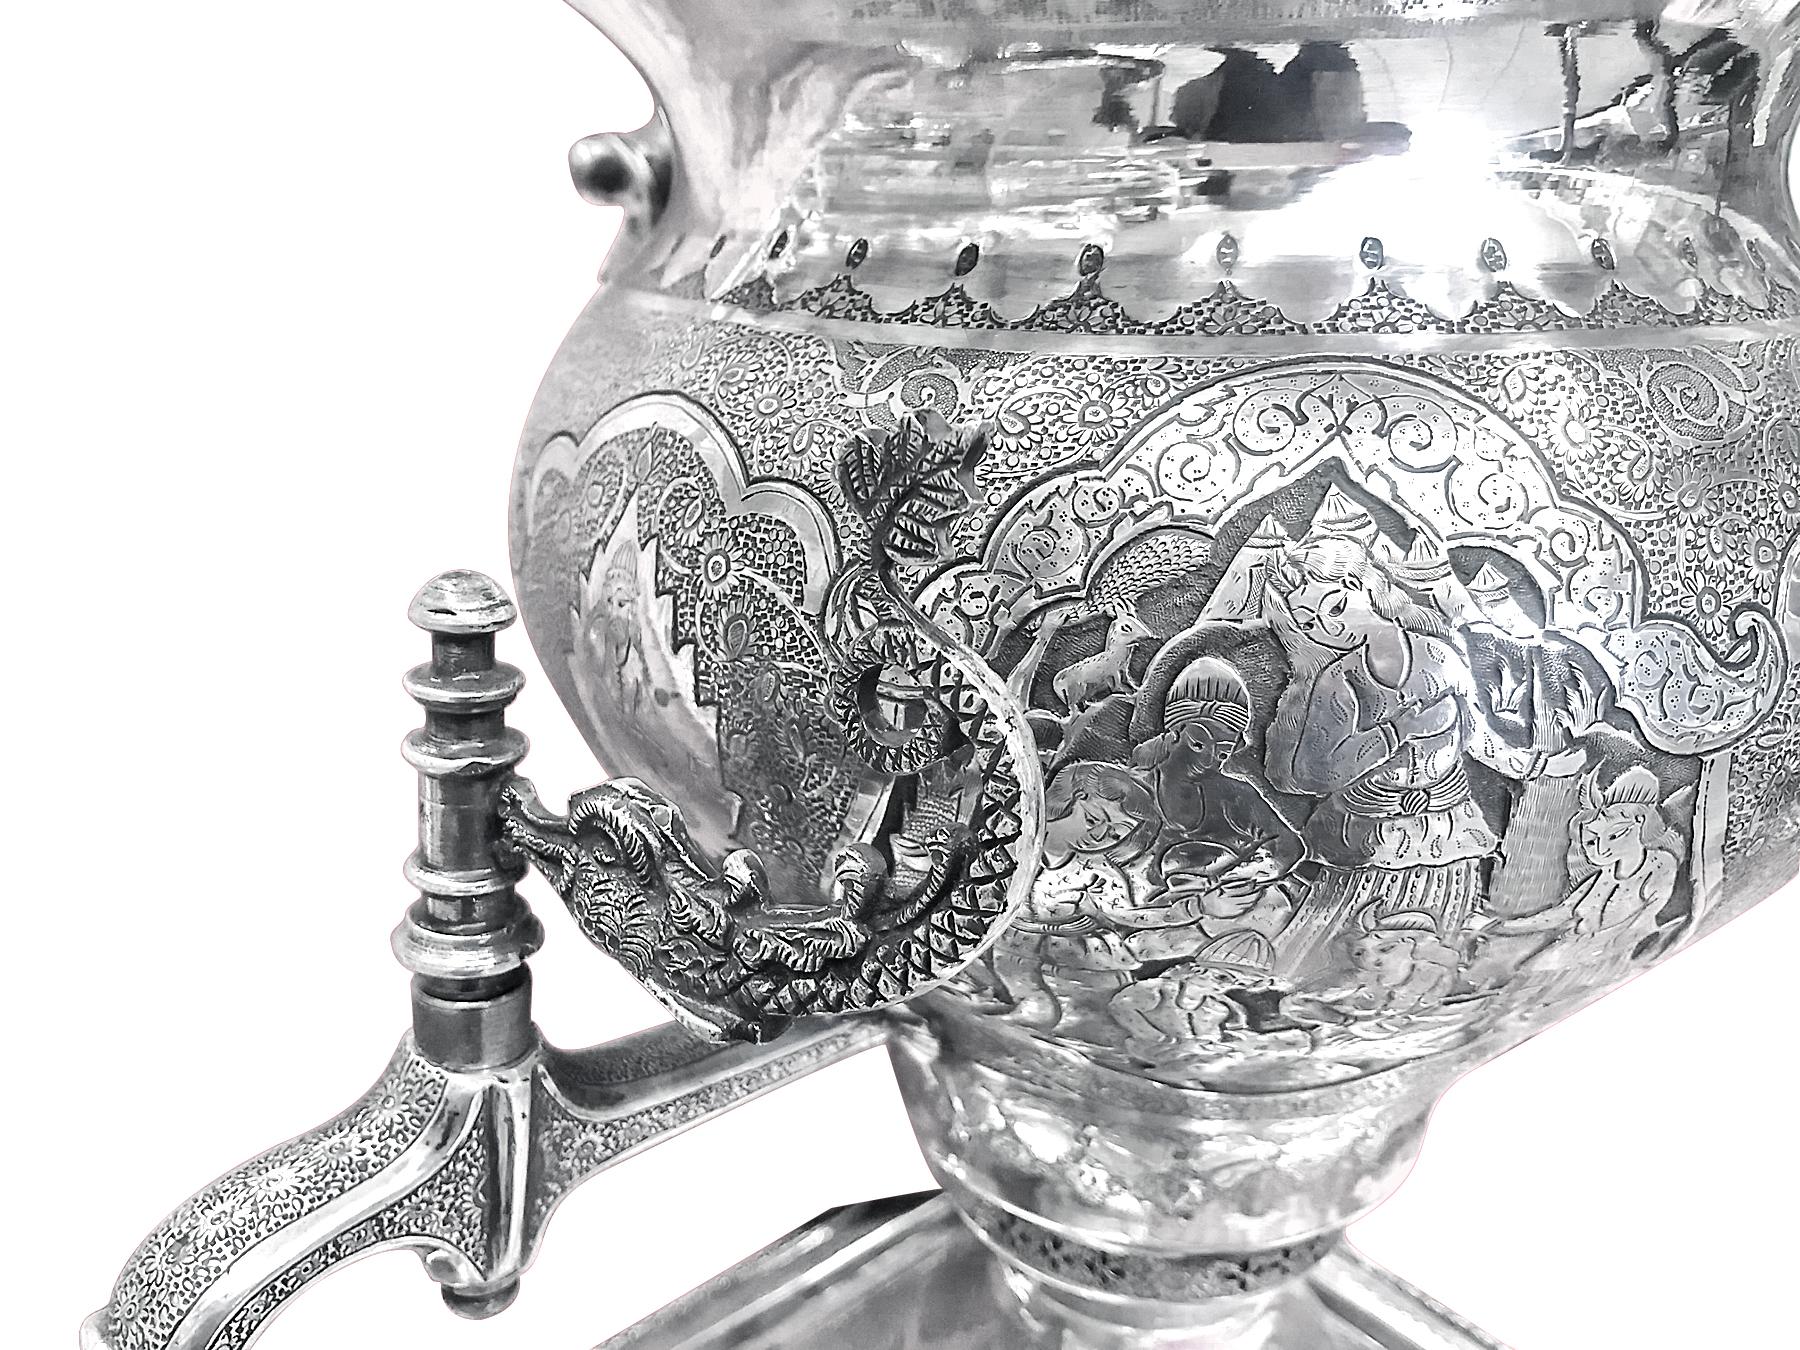 Collectible 1920s Silver Samavar from Iran Handcrafted &handCarved .Rare Piece 9